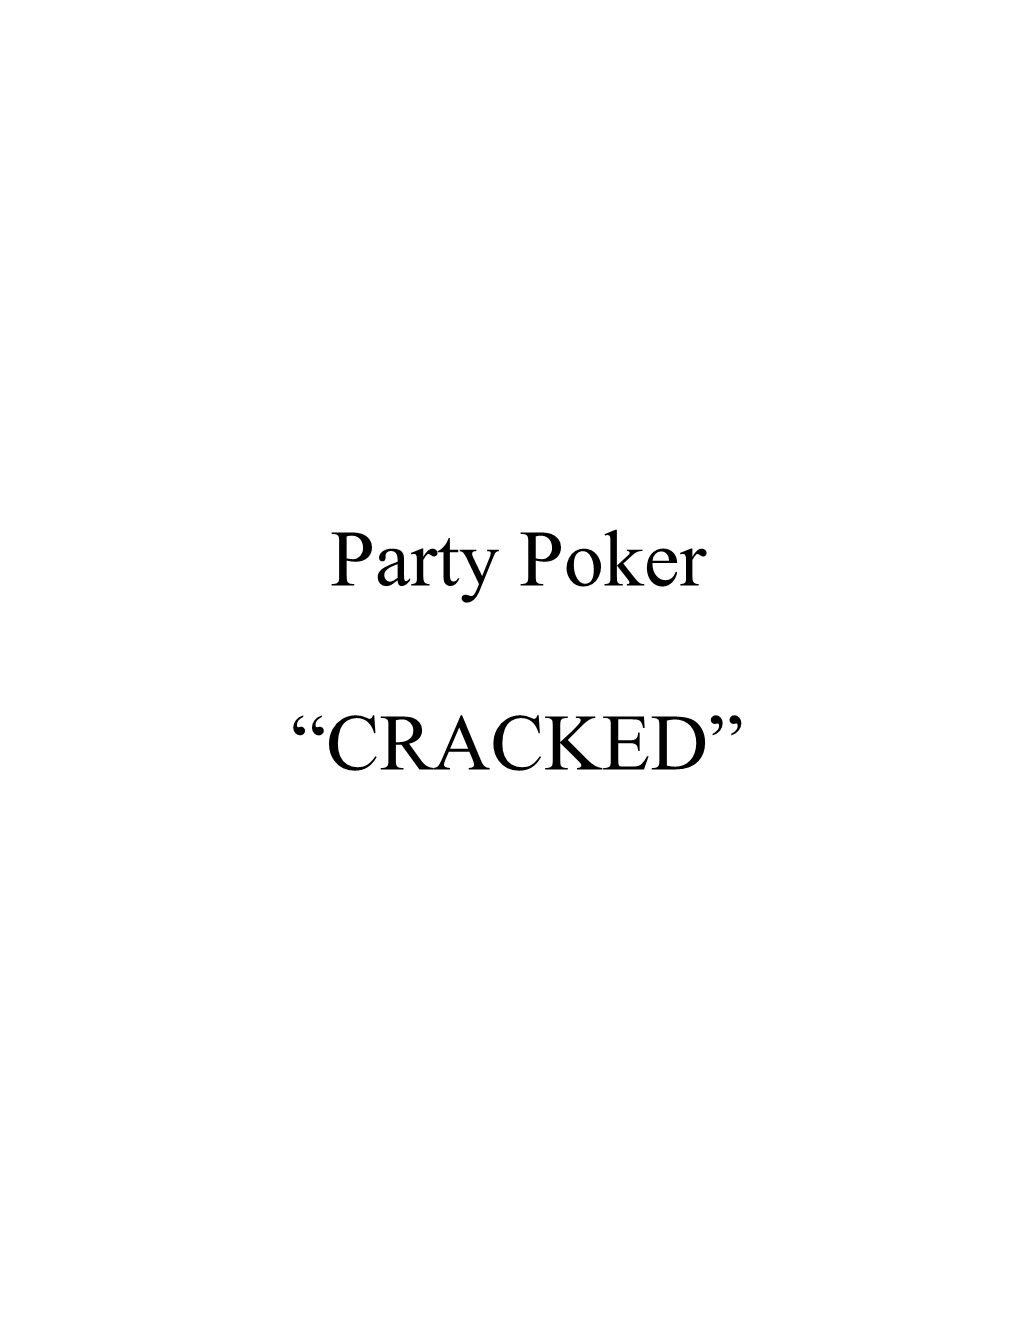 Party Poker —CRACKED“